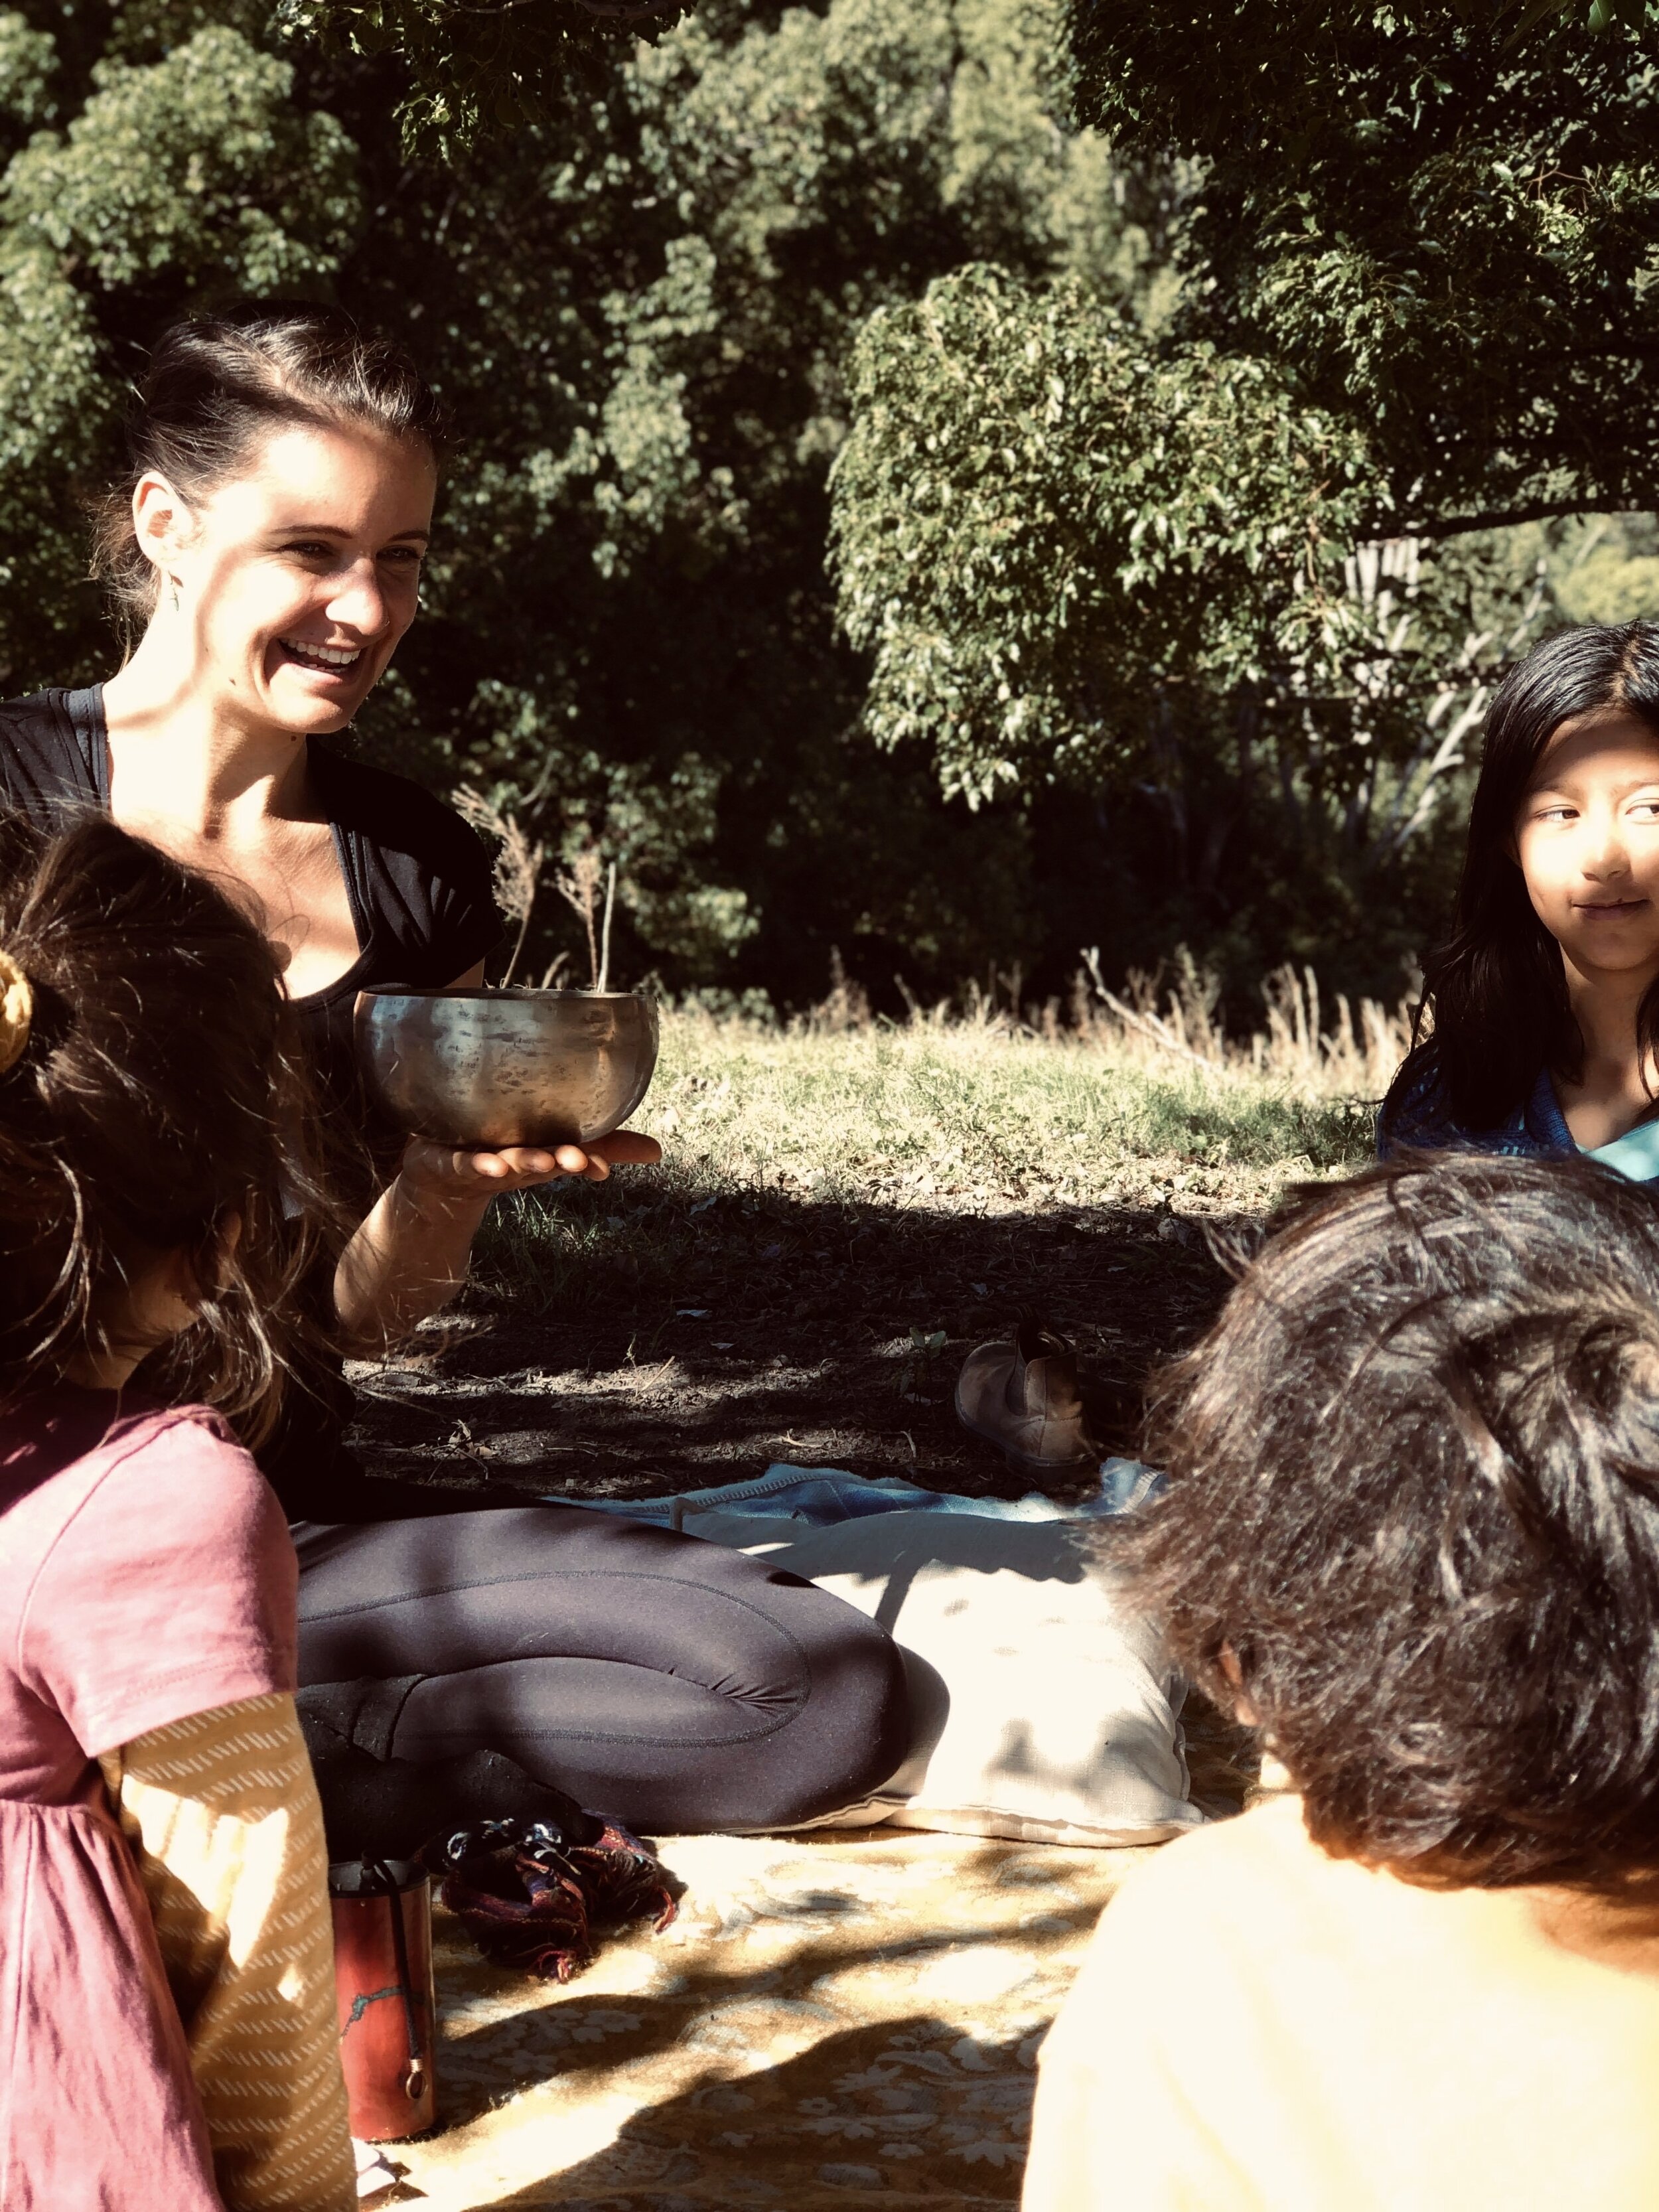 Breathwork meditation cacao ceremony mindfulness Love Connection loving kindness woman’s circle sacred sisters one with nature conscious Connections horse lover nature lover  6665.jpg